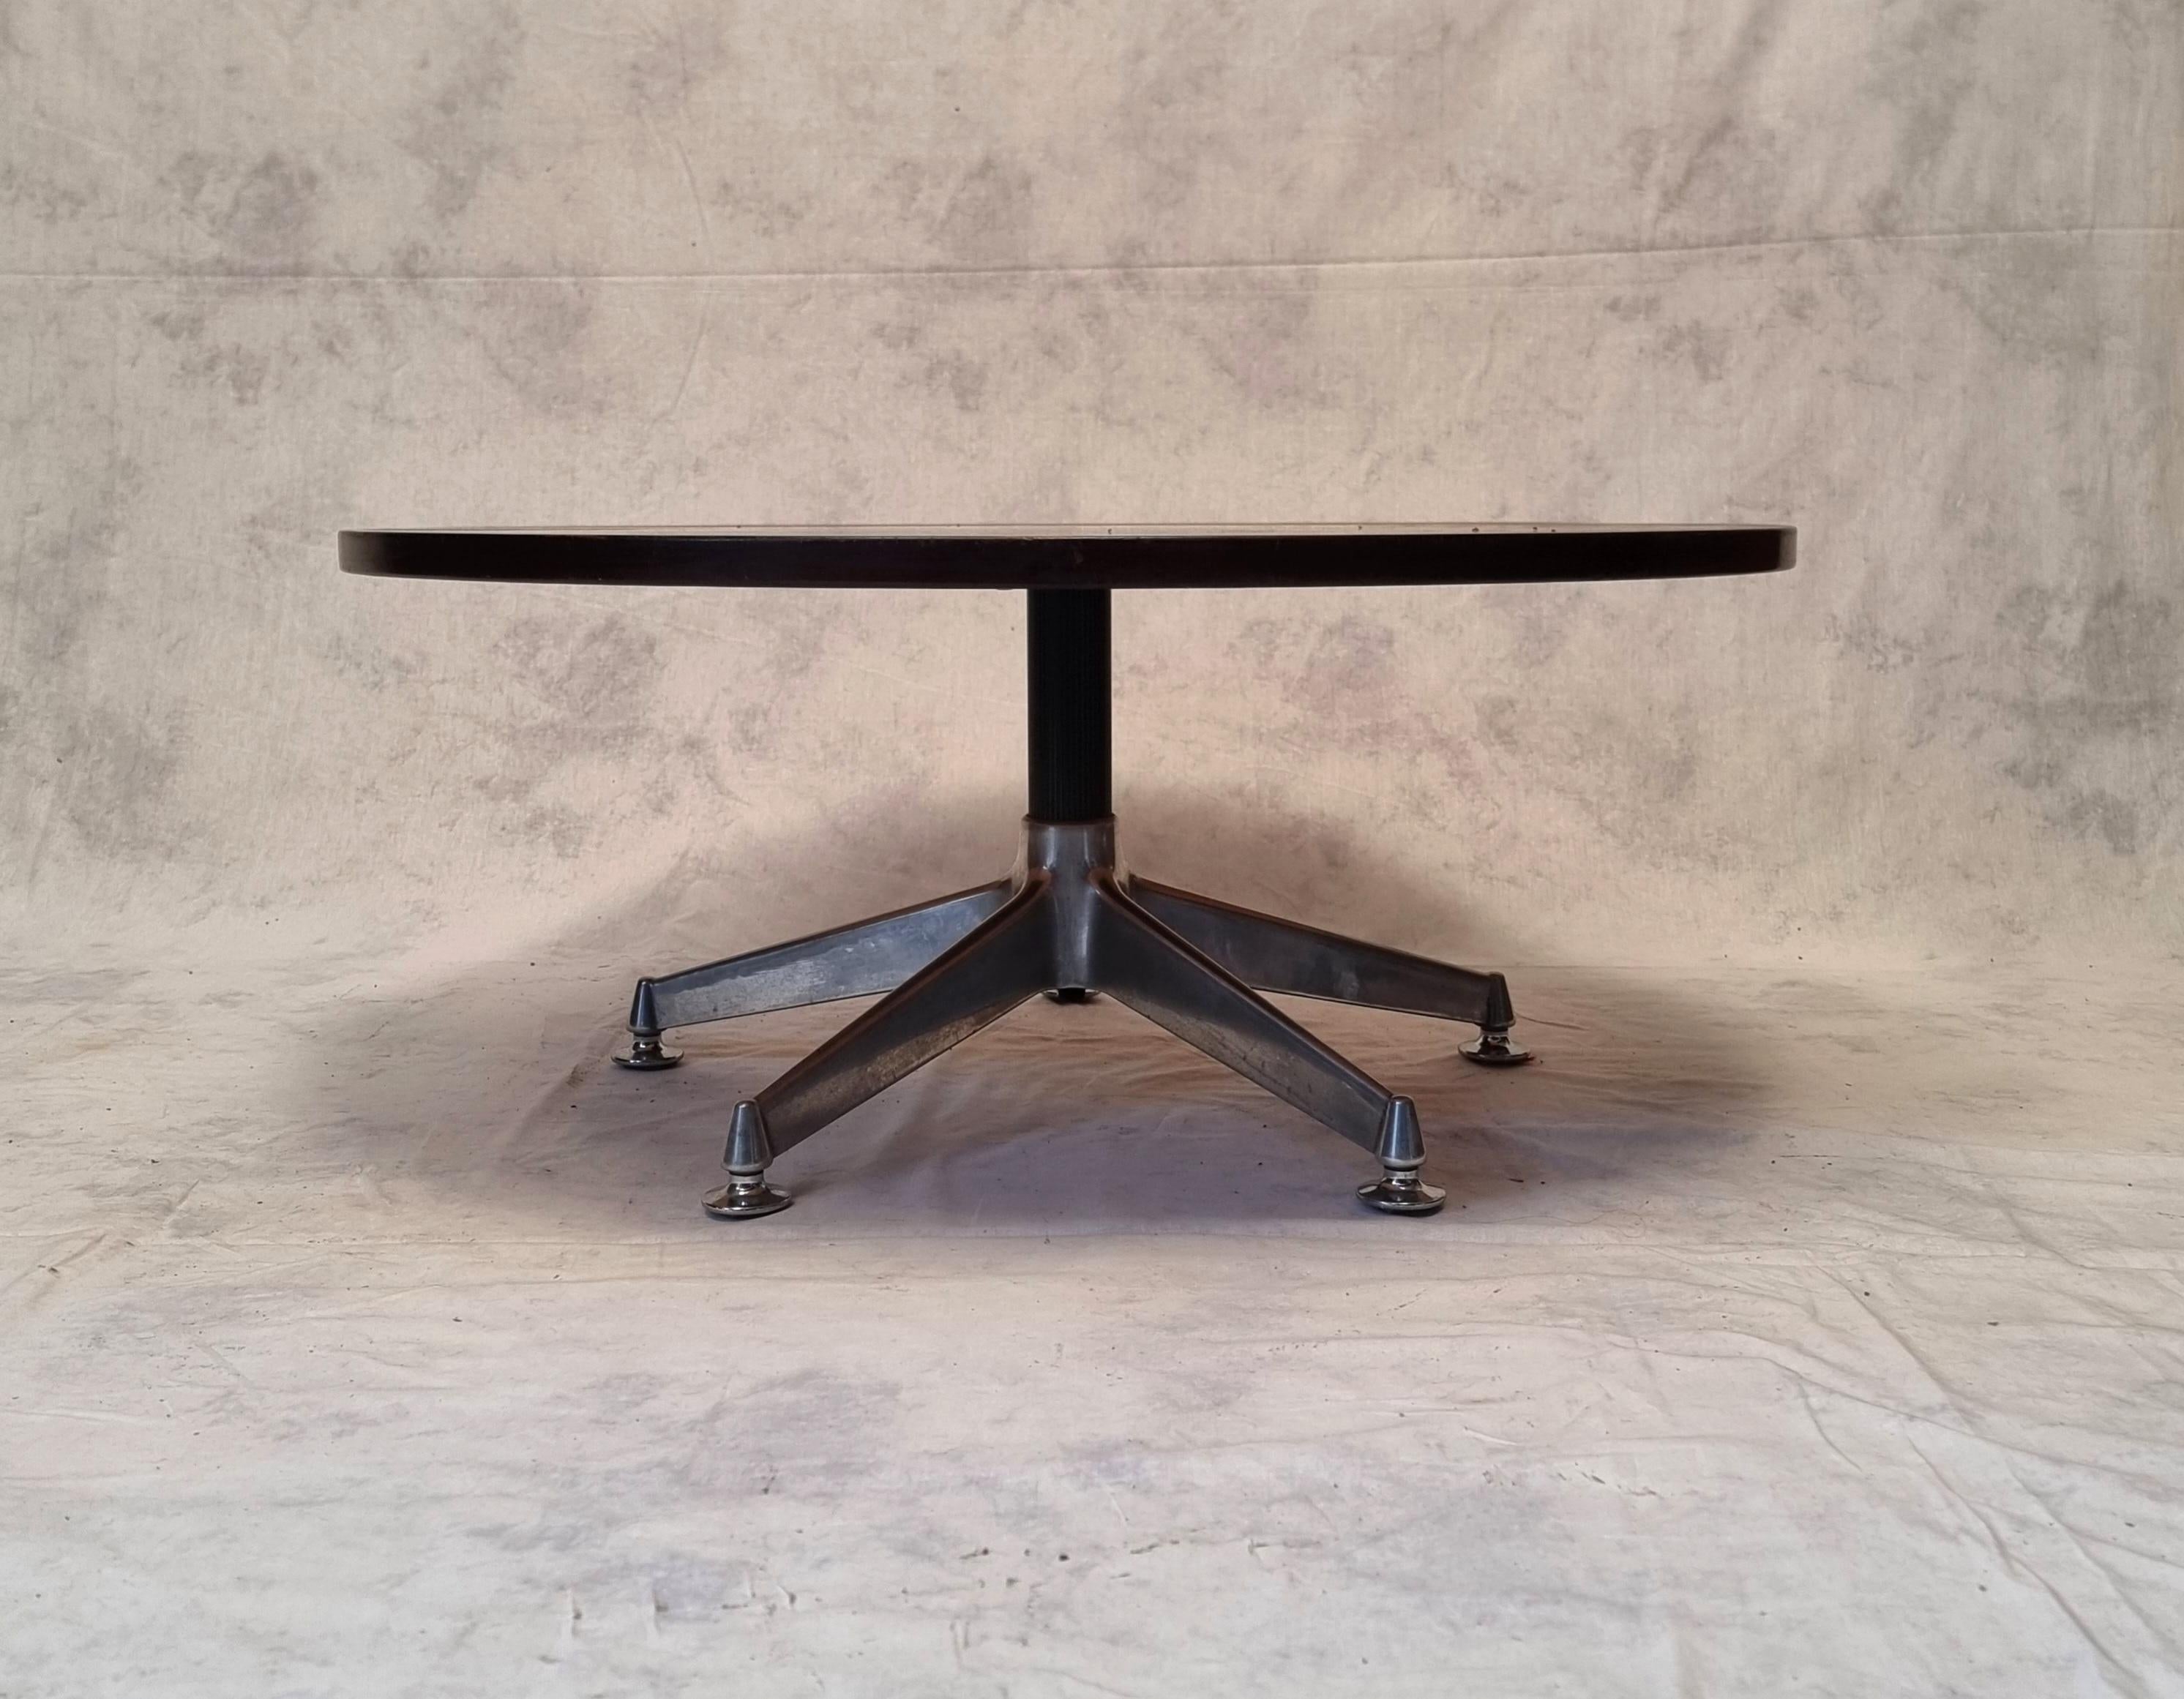 Coffee table by architect and Italian designer Ico Parisi. Big name in Italian furniture, Ico Parisi got down to multiple creations, some of which can be recognized by these atypical feet. This coffee table, produced by MIM in the 1960s, is in Rio